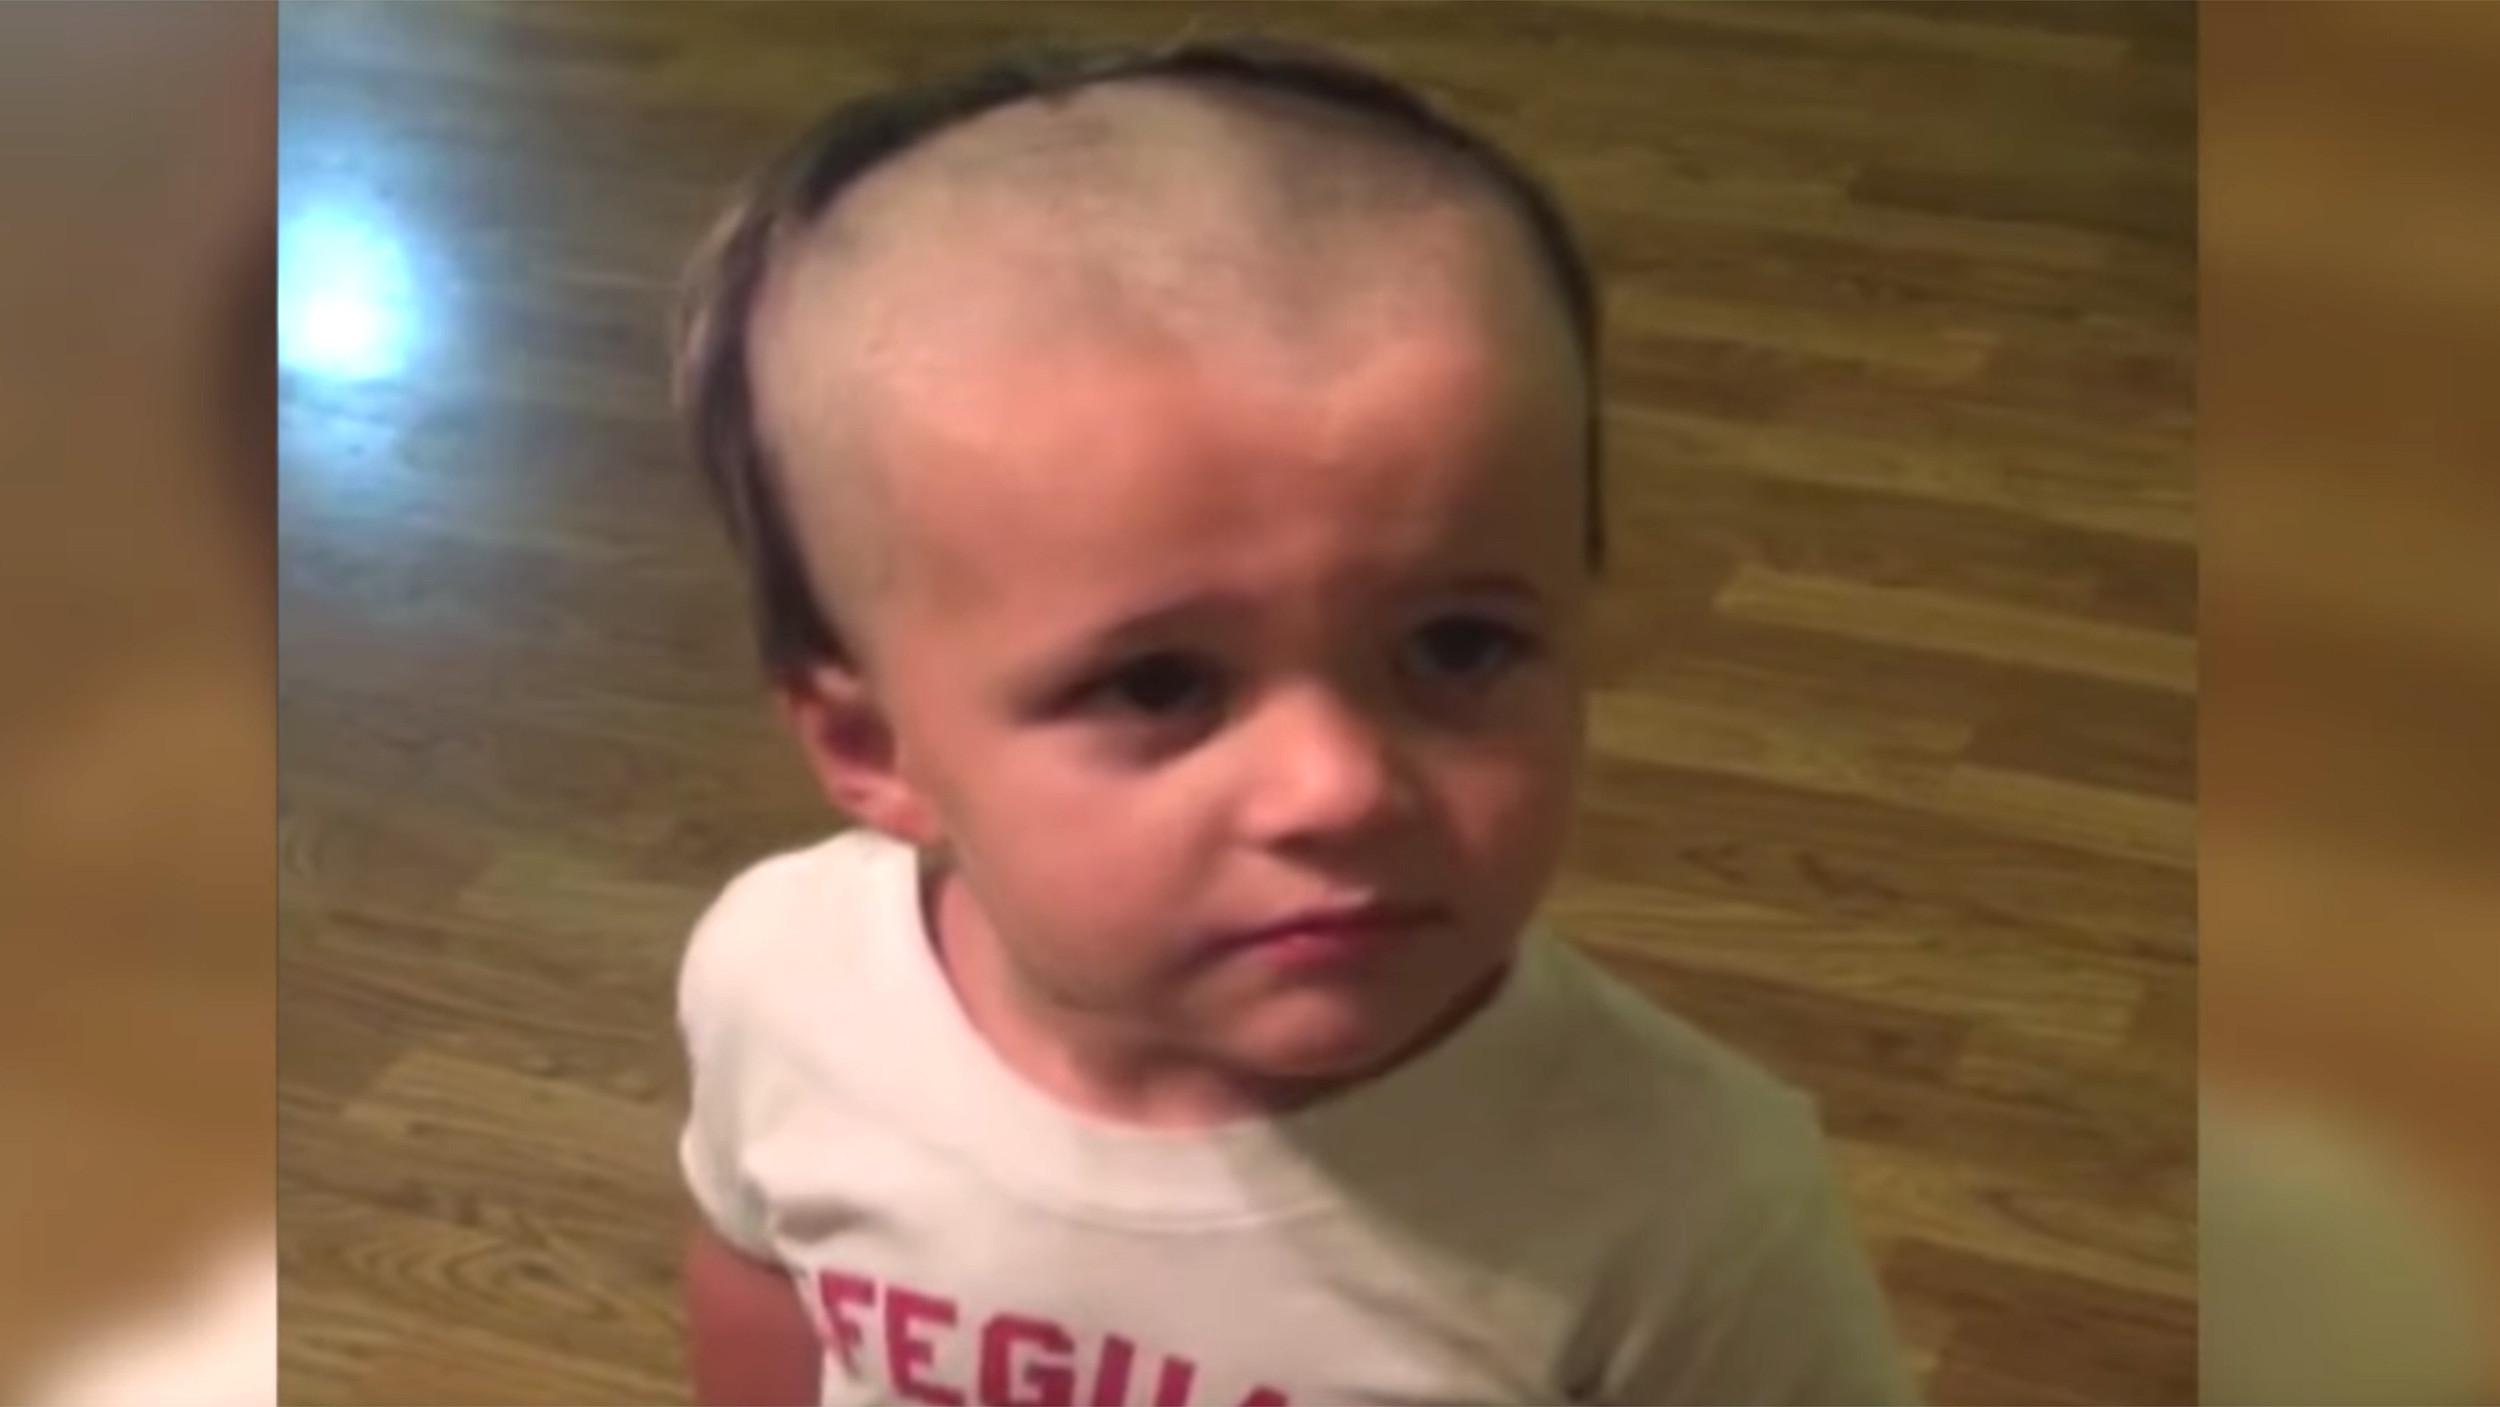 Bad Baby Hair
 Boy gives himself a receding hairline ‘I’ll never touch